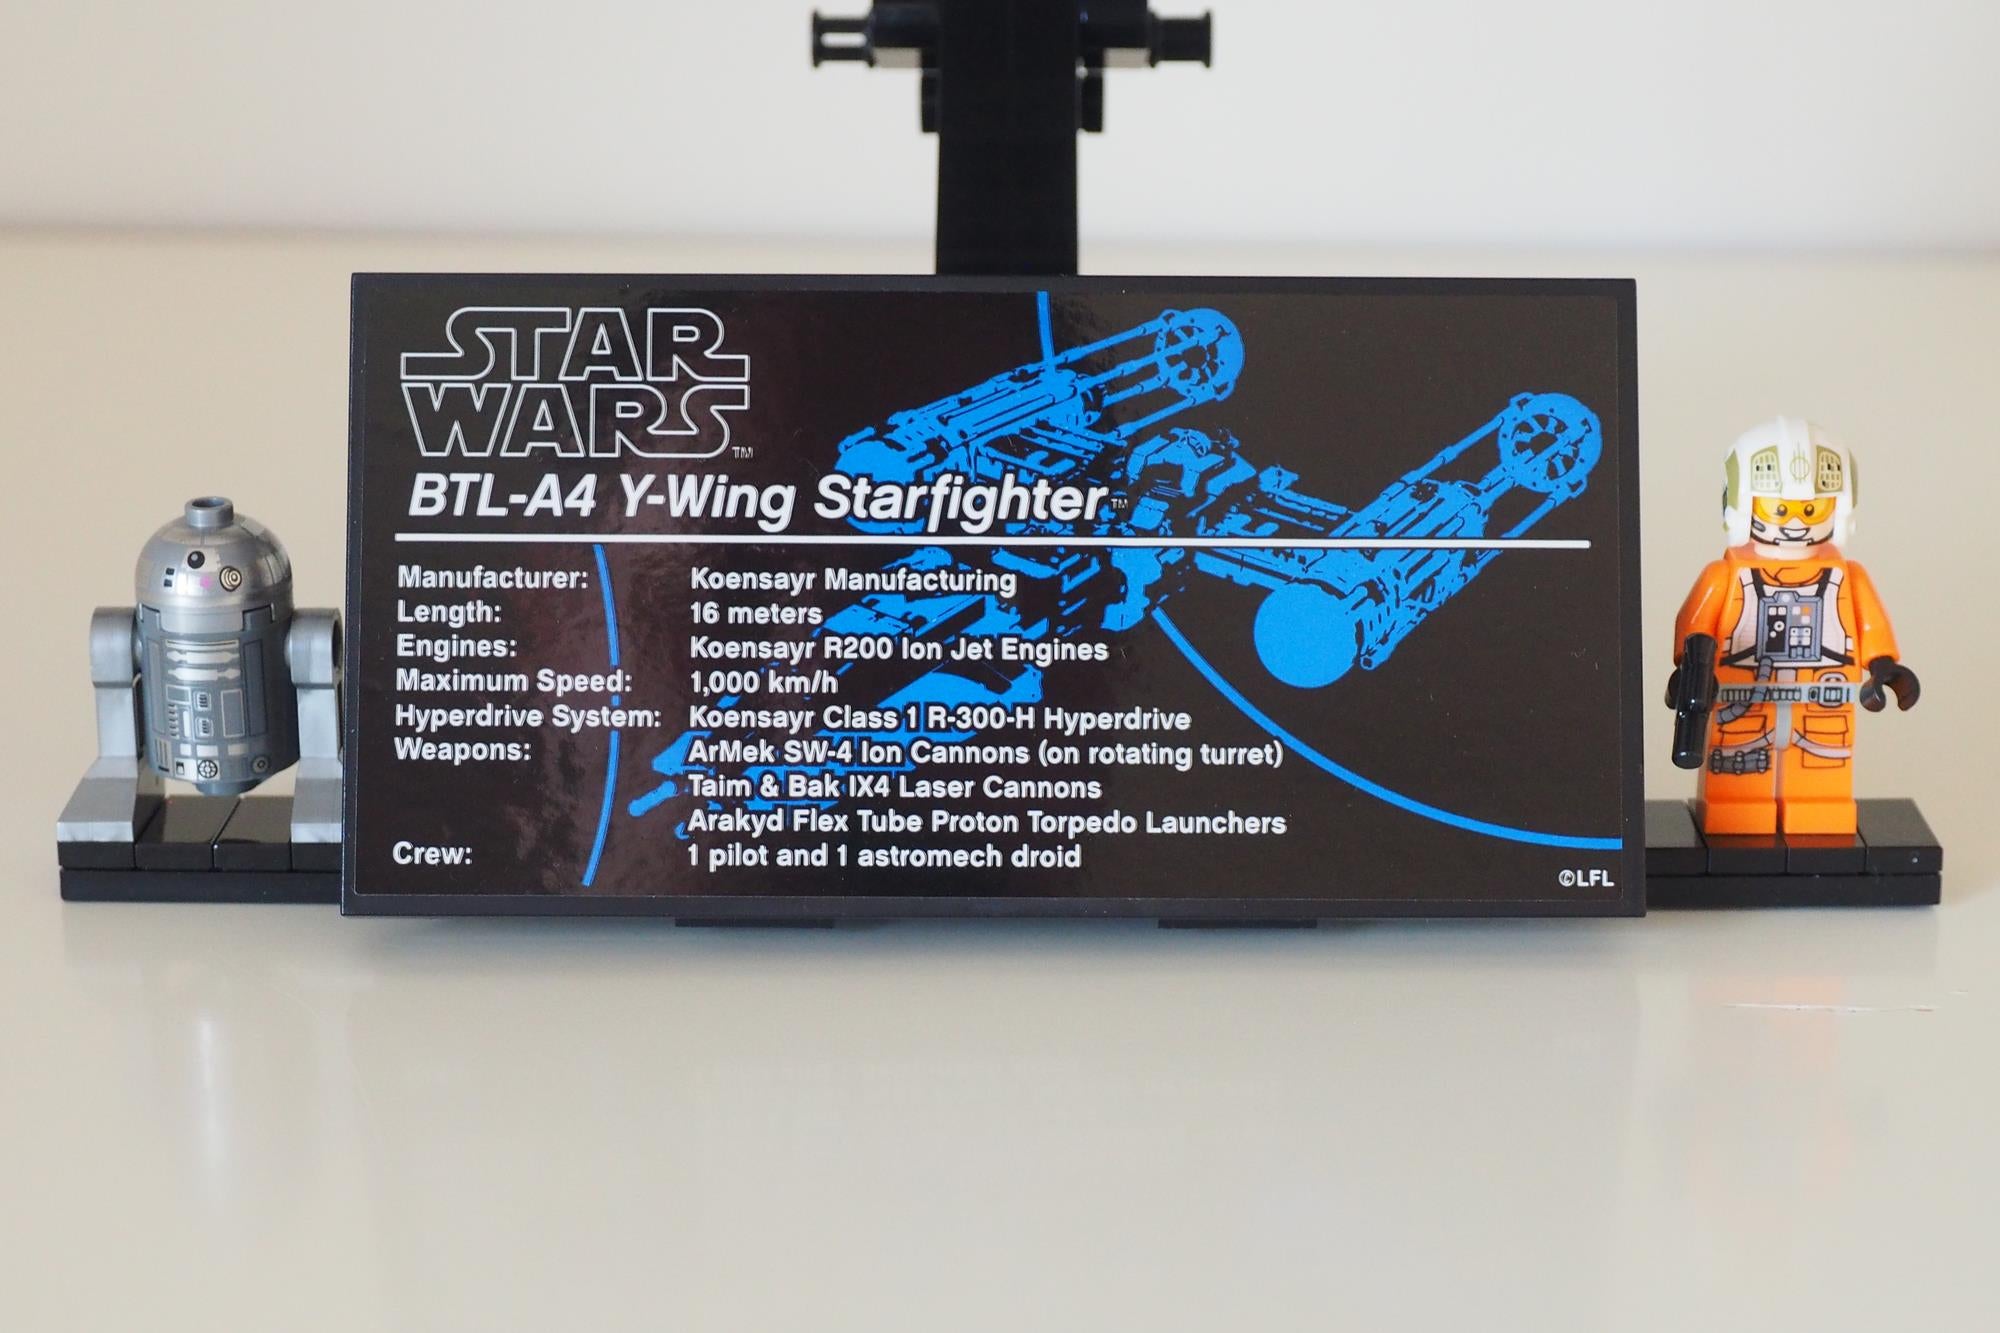 LEGO Star Wars Y-Wing model with information plaque and figures.